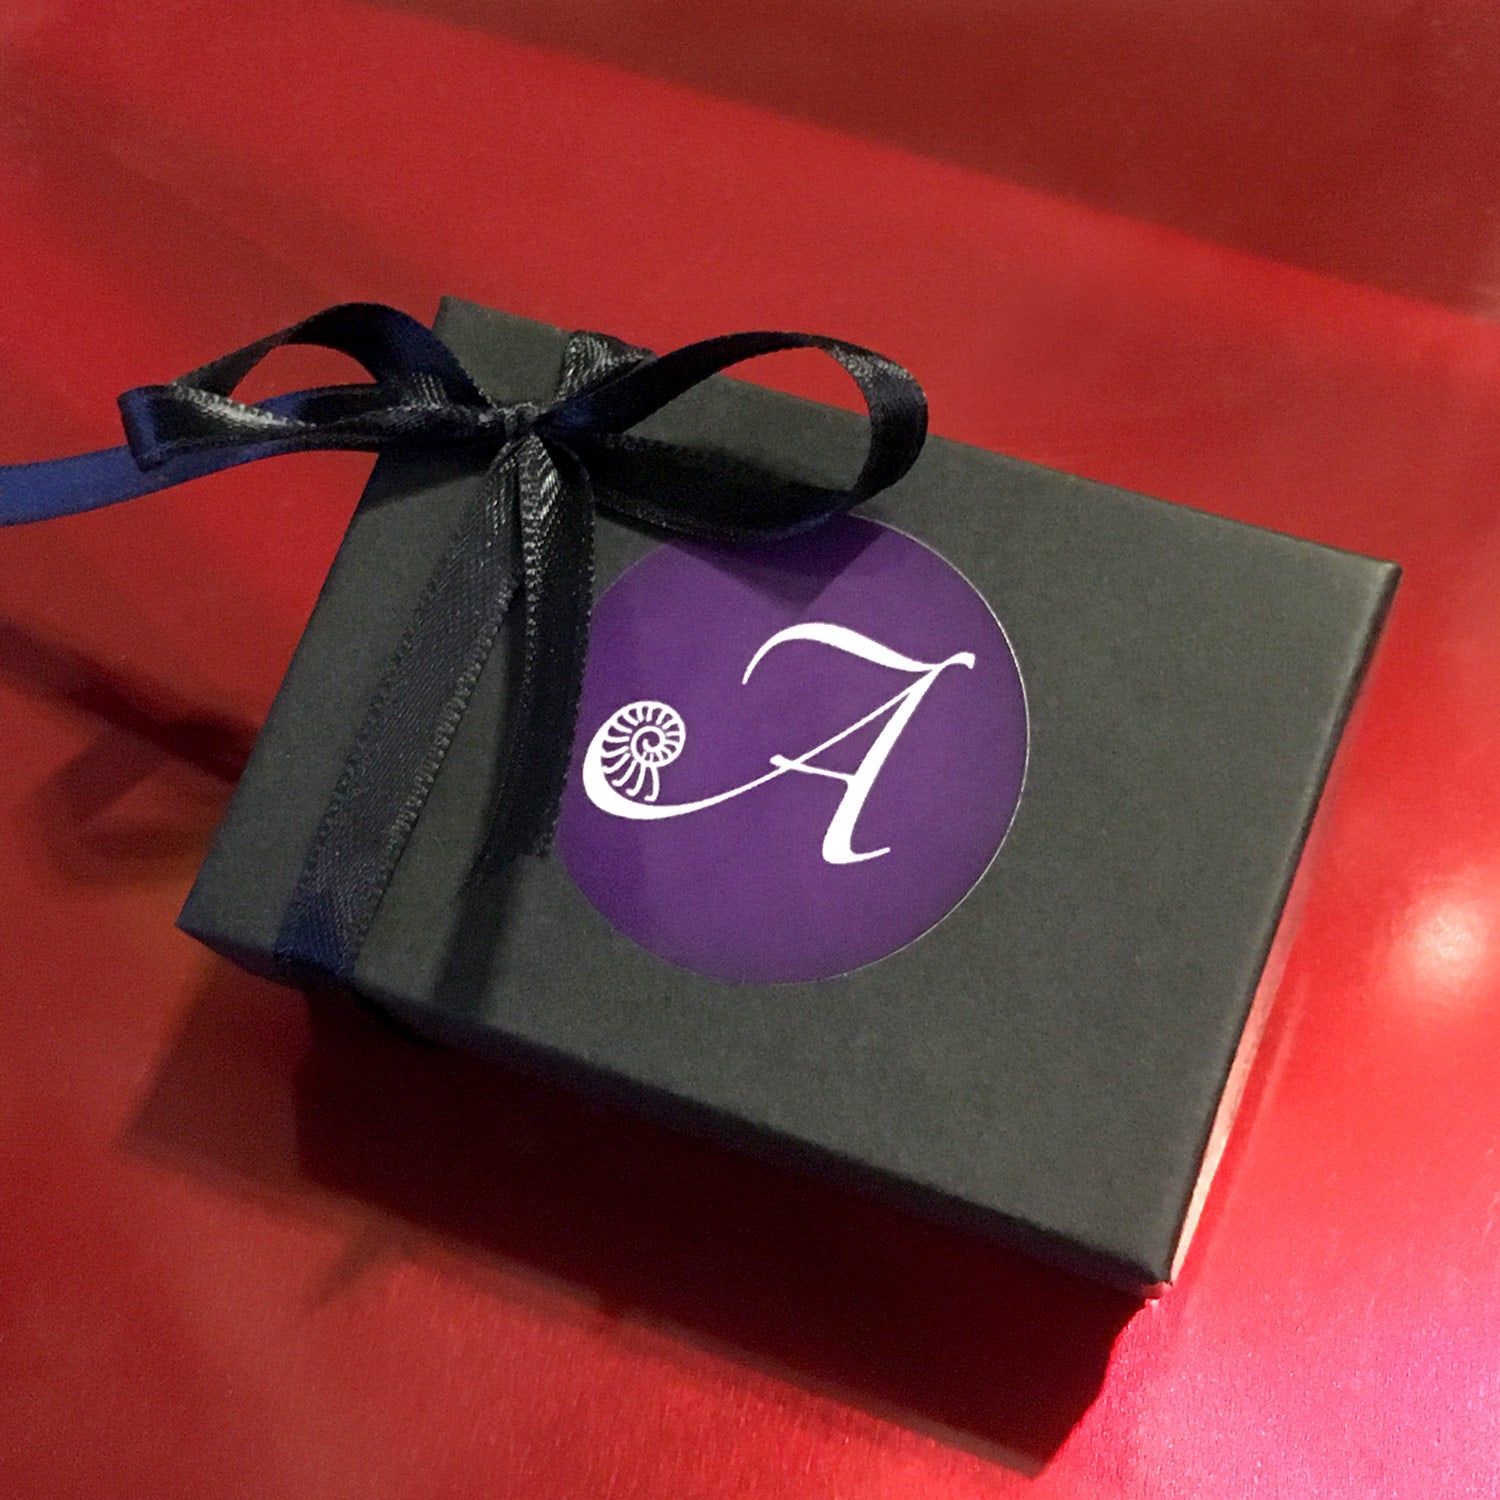 A black jewelry gift box with a purple label featuring the Arcana Metalwork logo, and a black satin bow.